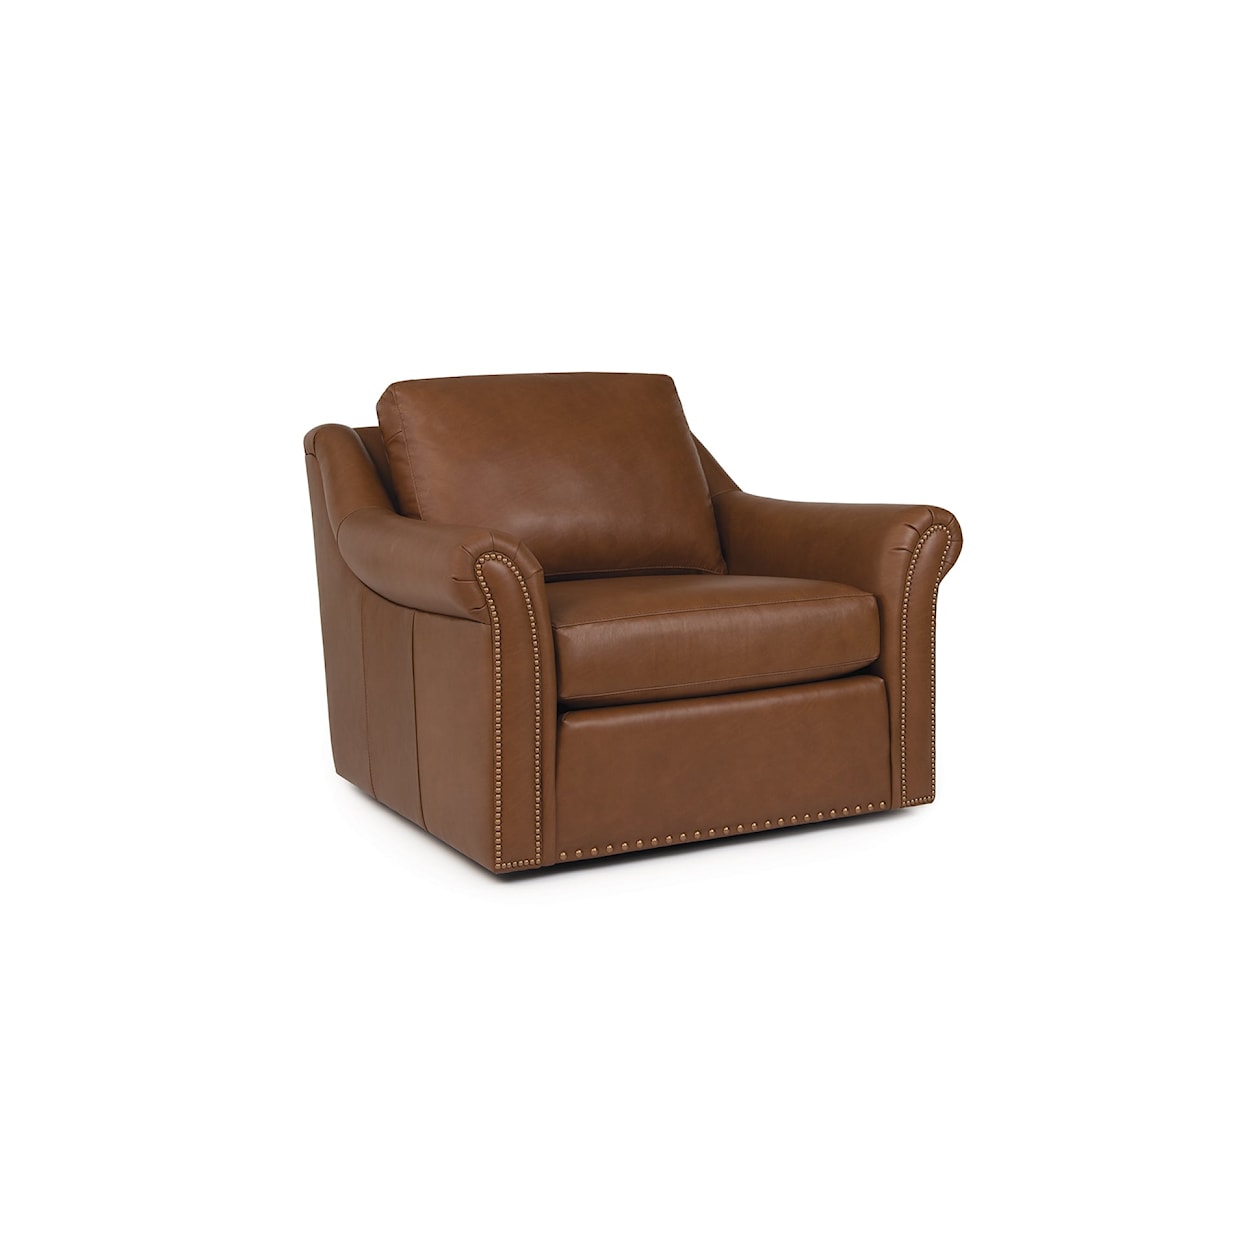 Smith Brothers 9000 Leather Swivel Chair